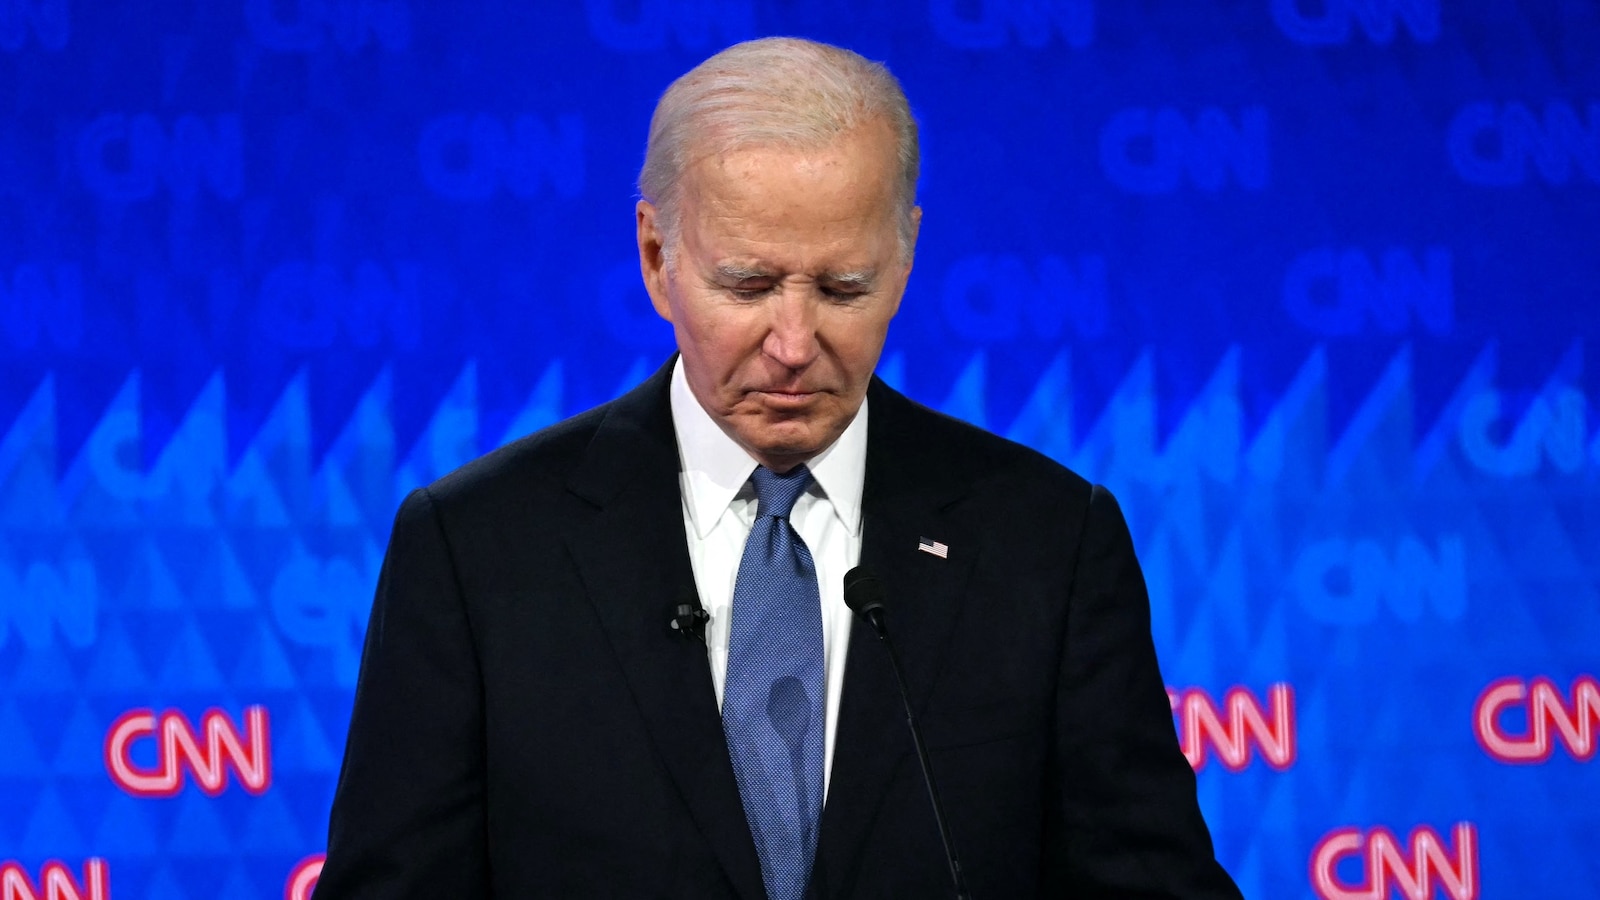 Biden attributes poor debate performance to international travel, admits to feeling fatigued on stage